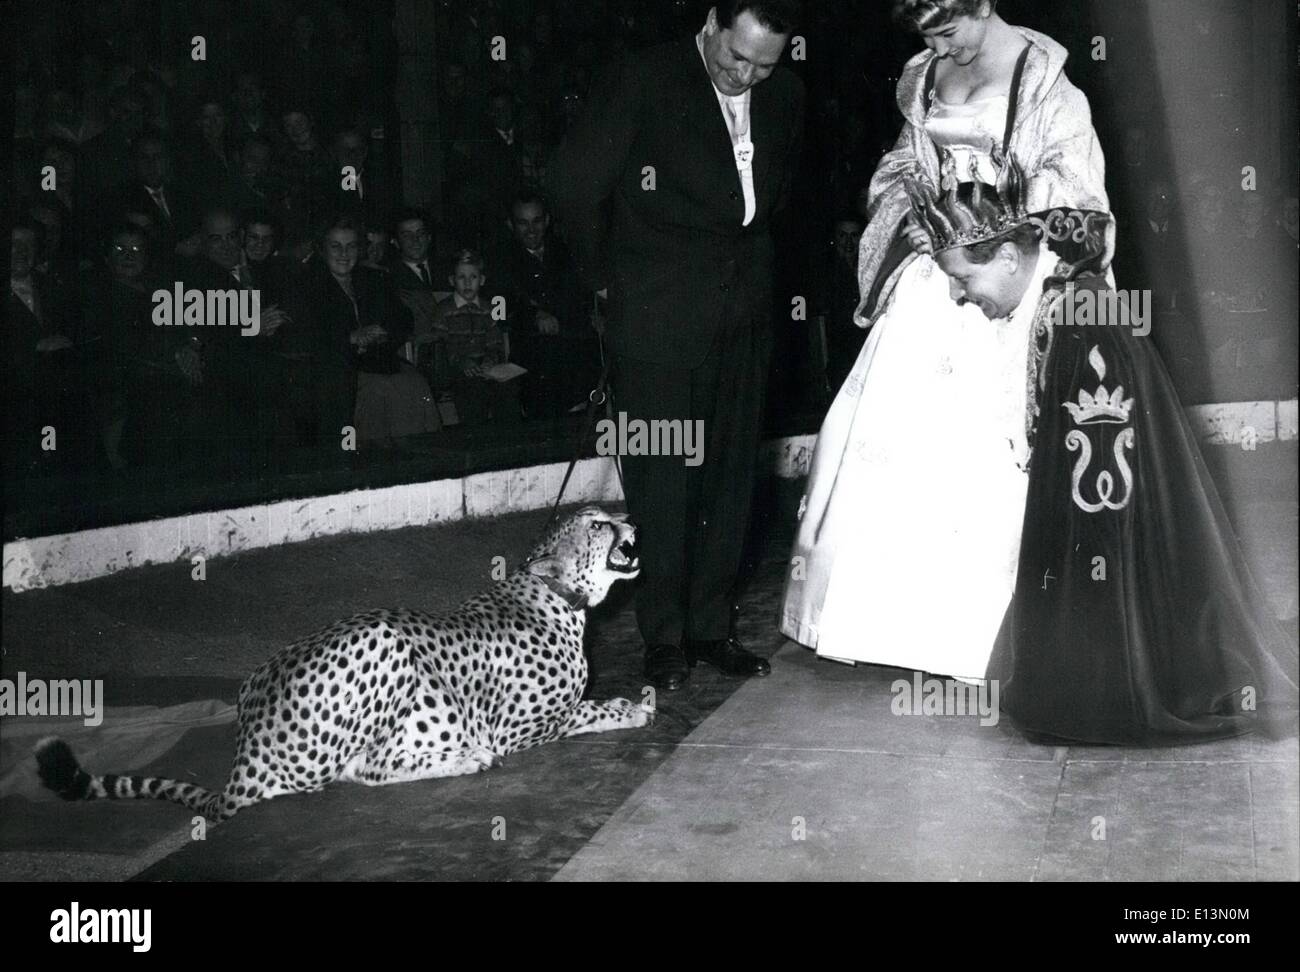 Mar. 02, 2012 - Cheetah not impressed with called royalty. Stock Photo